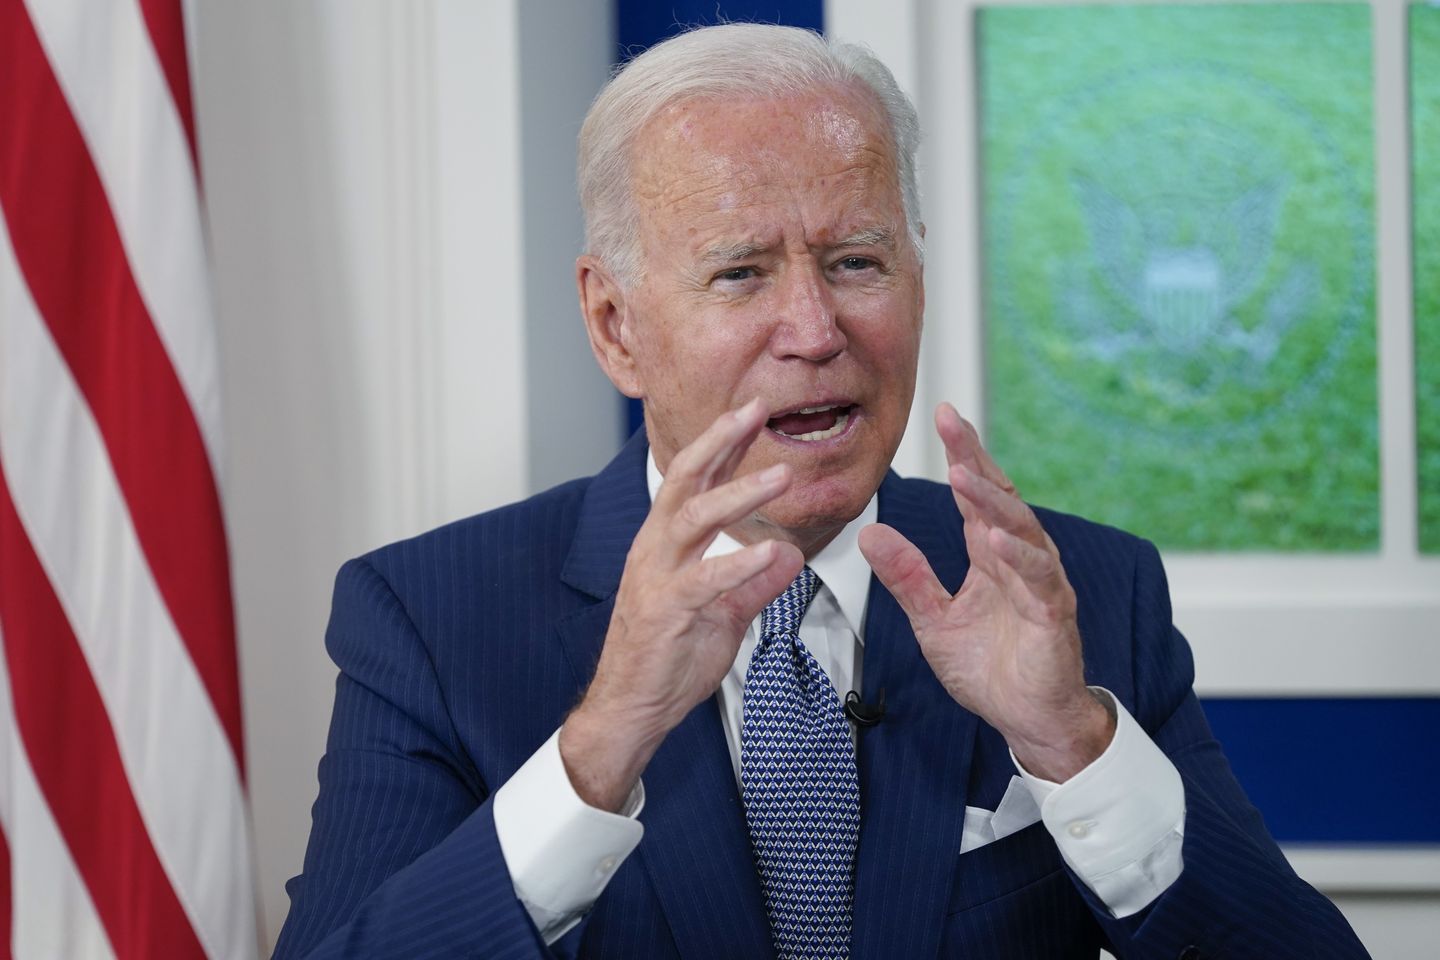 Biden to global leaders: Time to step up efforts on vaccines, oxygen, treatments